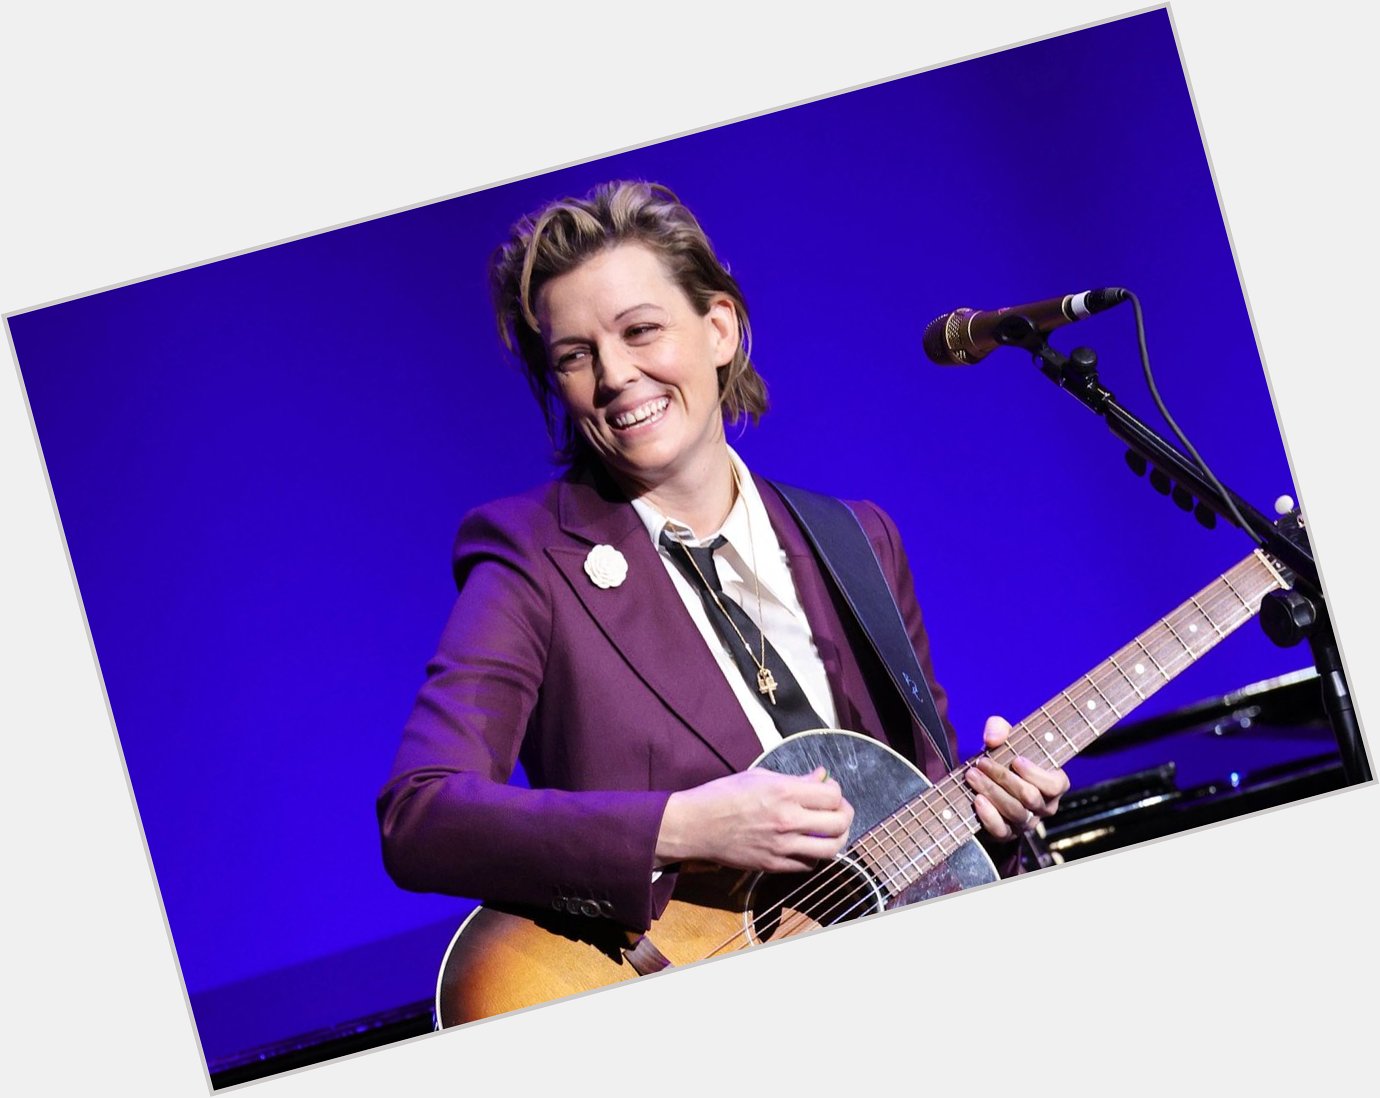 Happy Belated Birthday to an amazing singer, songwriter, and performer Brandi Carlile! 